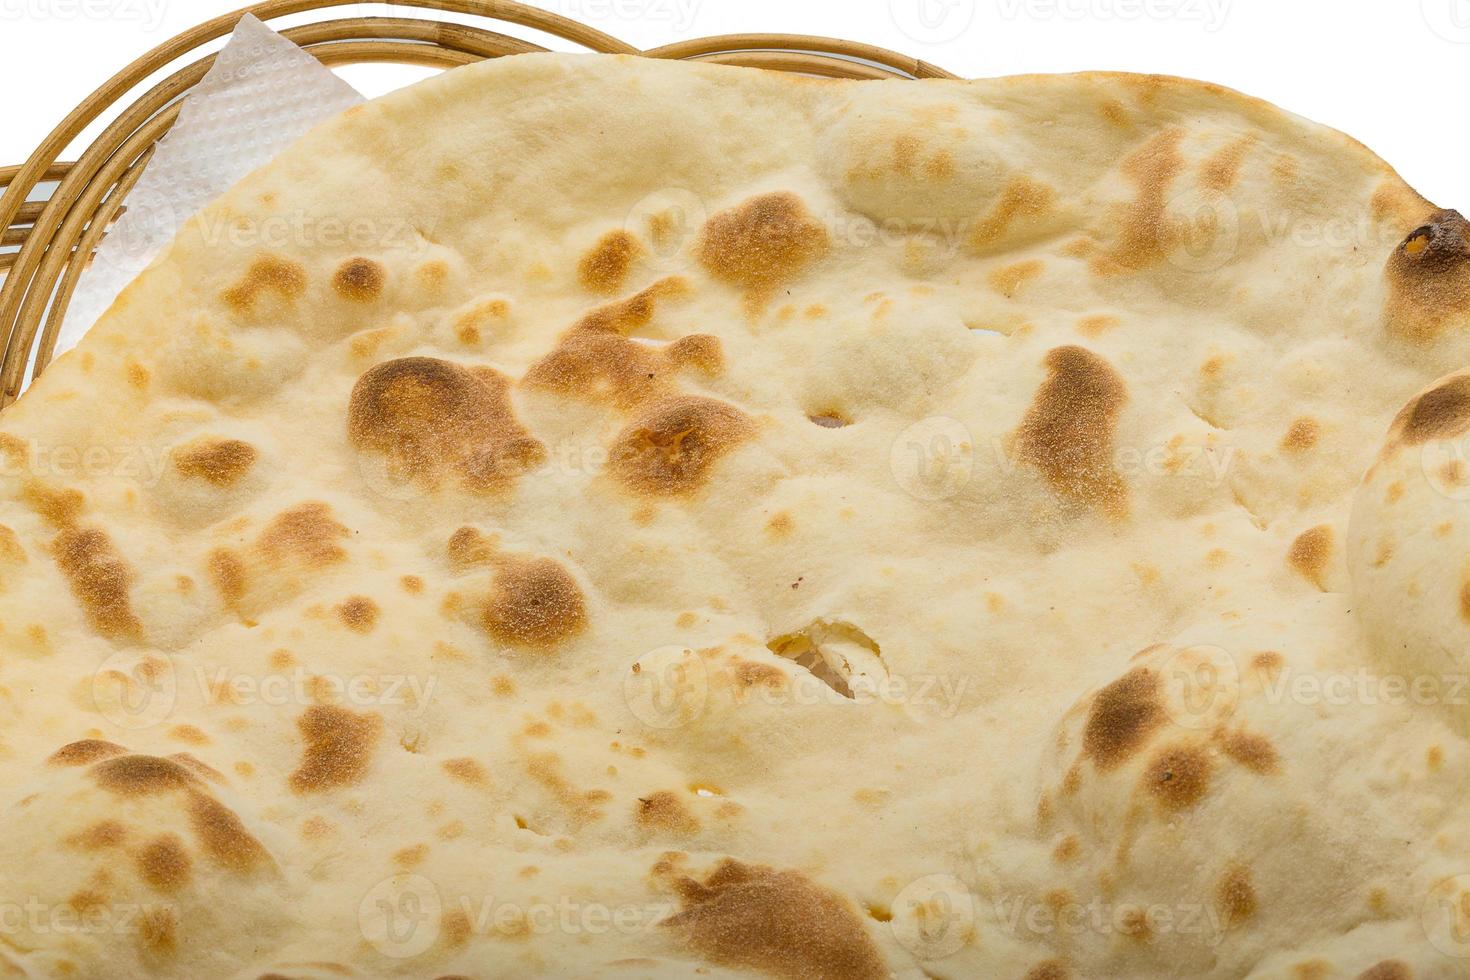 Plain Naan in a basket photo